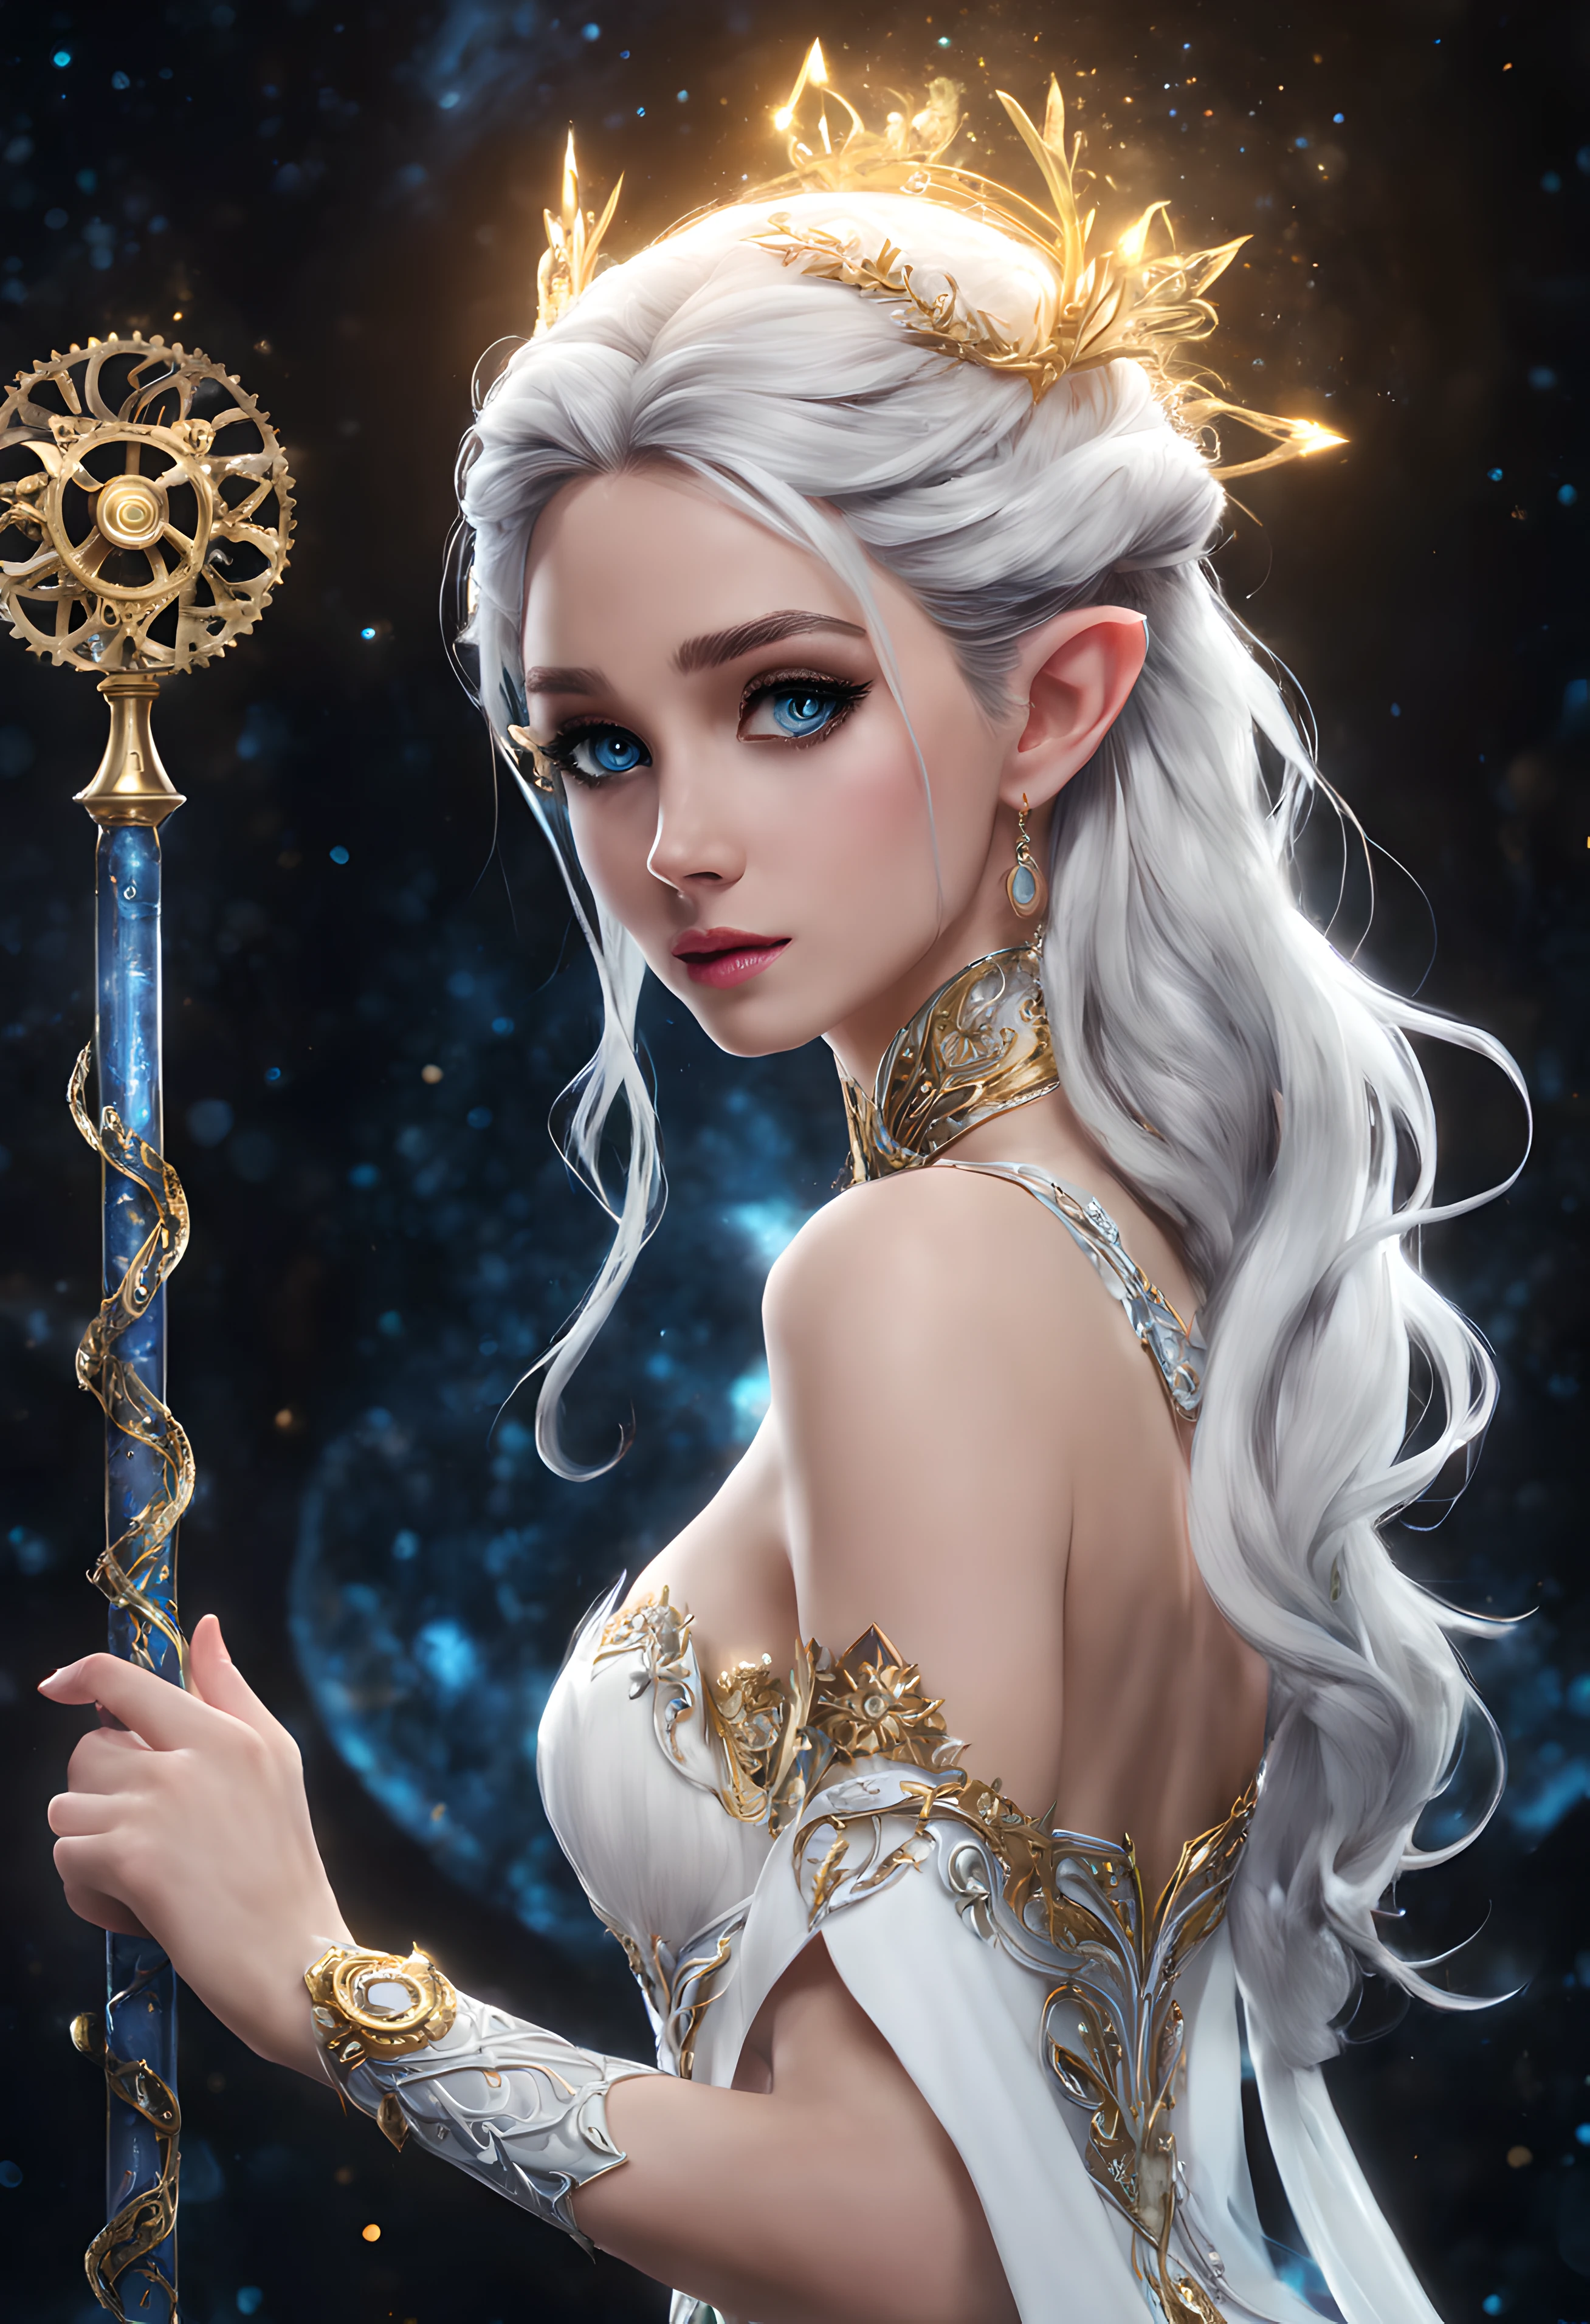 An image of a fantastic female character with a dynamic pose, Showcasing the fusion of technology and magic. She has silver hair styled in intricate braids。。, big expressive blue eyes, Pointed ears reminiscent of elf lineage. She、She、Delicate gold trim and heart-shaped pink accents along the neckline、hali々She is wearing a royal white dress.。。. In her hand, She gracefully wields an ornate staff that looks like a combination of ancient texts and mechanical gears.。.。, Sparkling magical power emanating from the core. The background is a swirling constellation, suggests she casts a powerful spell. The overall atmosphere is mysterious and enchanting